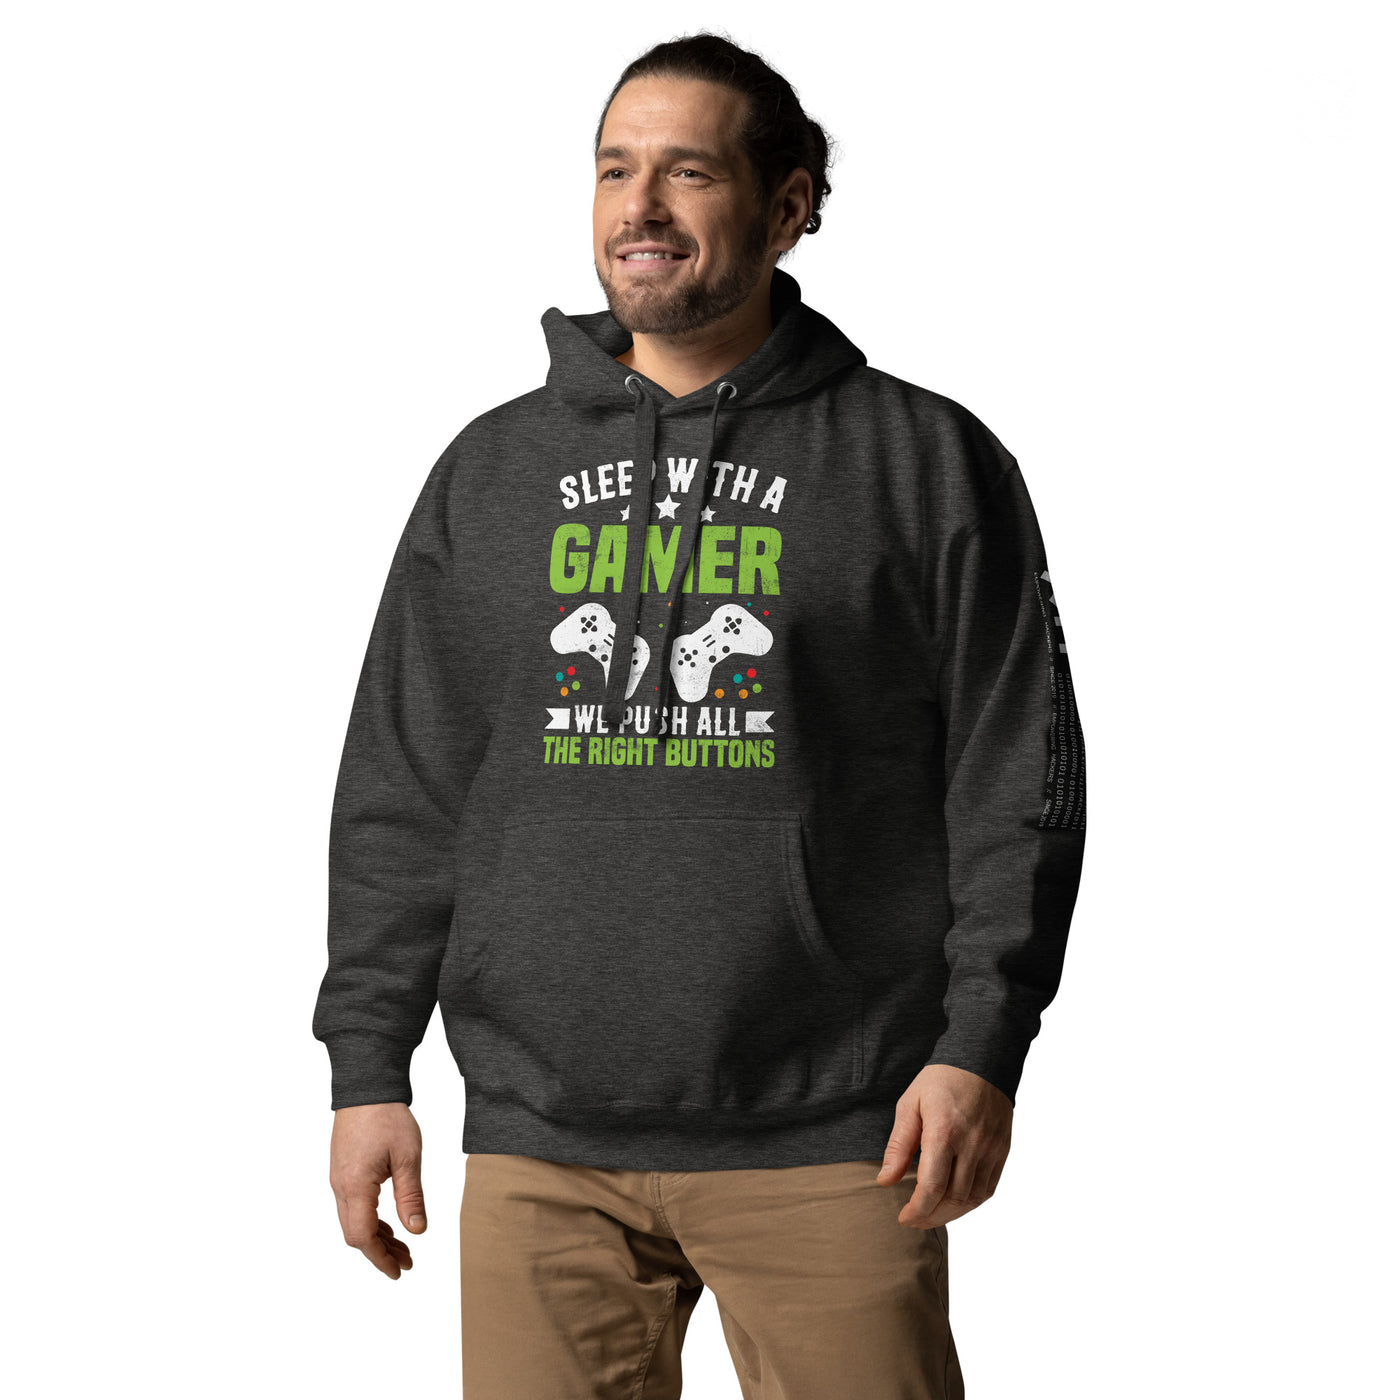 Sleep With a Gamer, We Push all the Right Button Unisex Hoodie